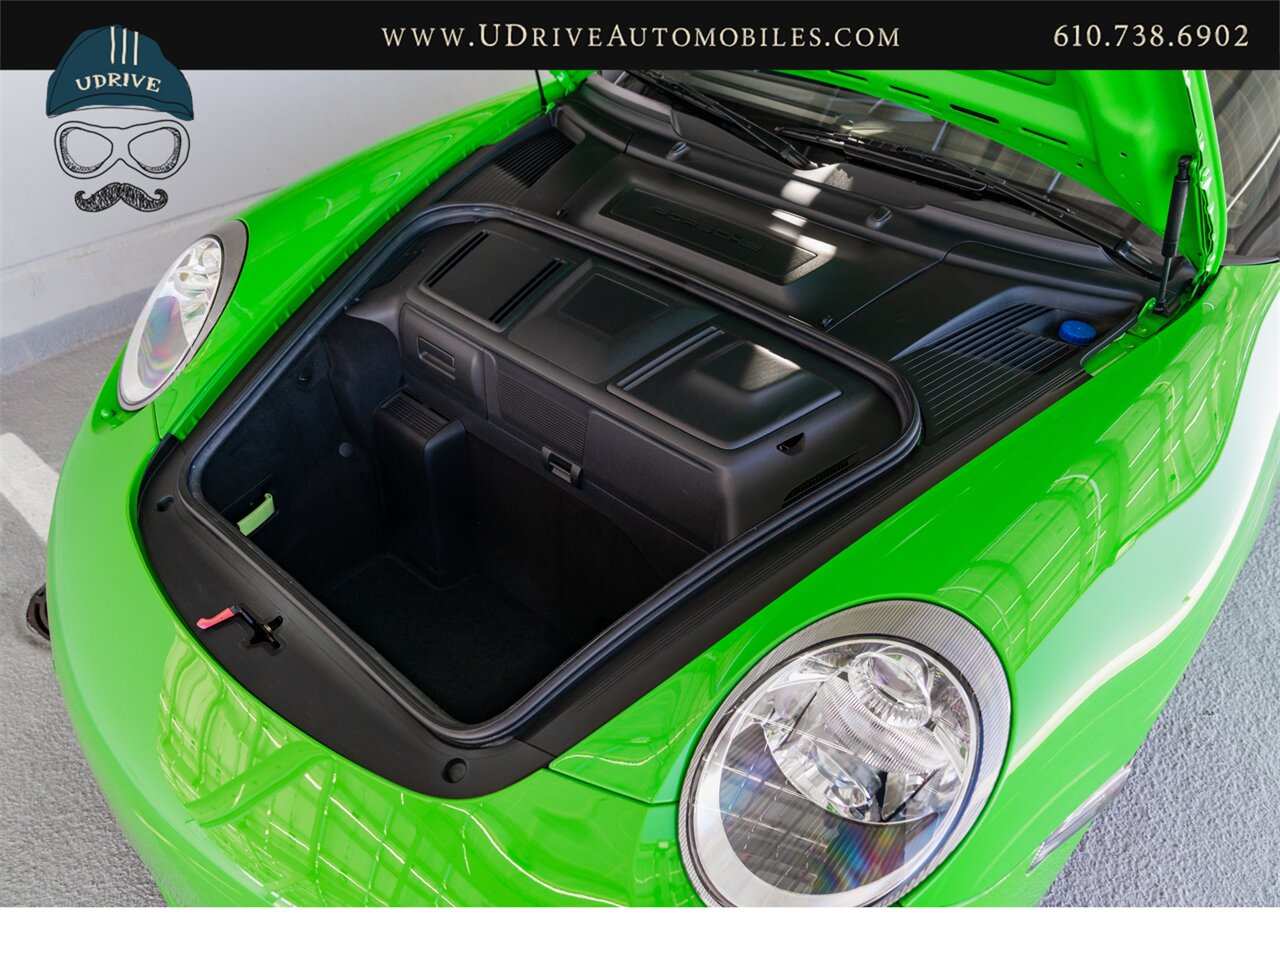 2006 Porsche 911 Carrera 4S  997 PTS Signal Green 6Sp Sport Sts Spt Chrono Spt Exhst - Photo 51 - West Chester, PA 19382